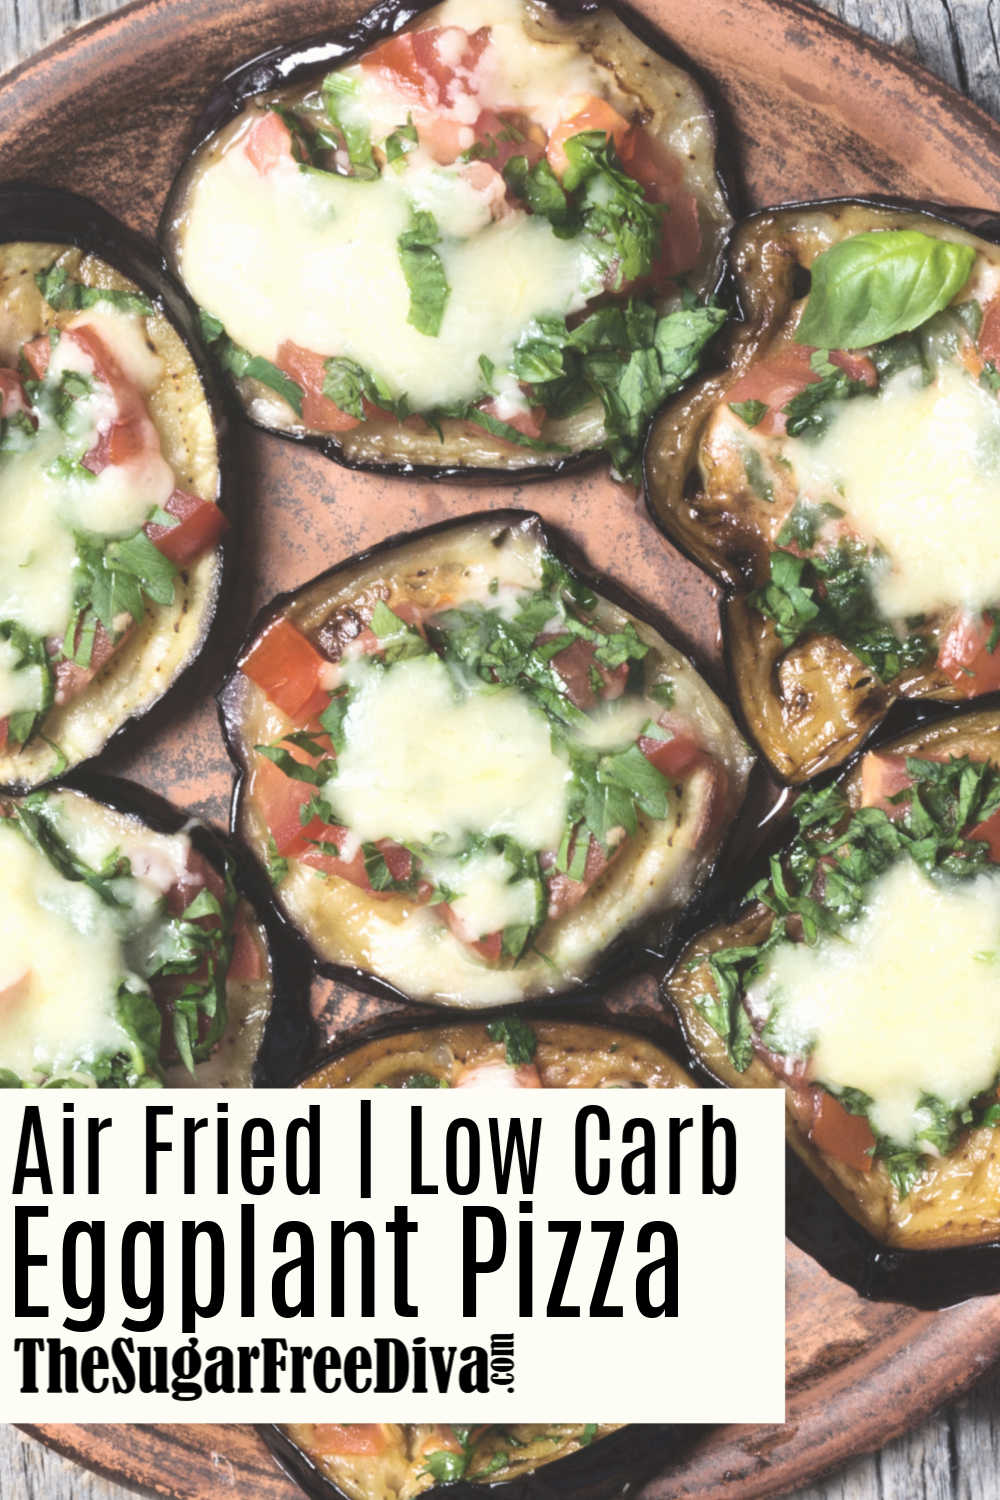 Air Fried Low Carb Eggplant Pizza